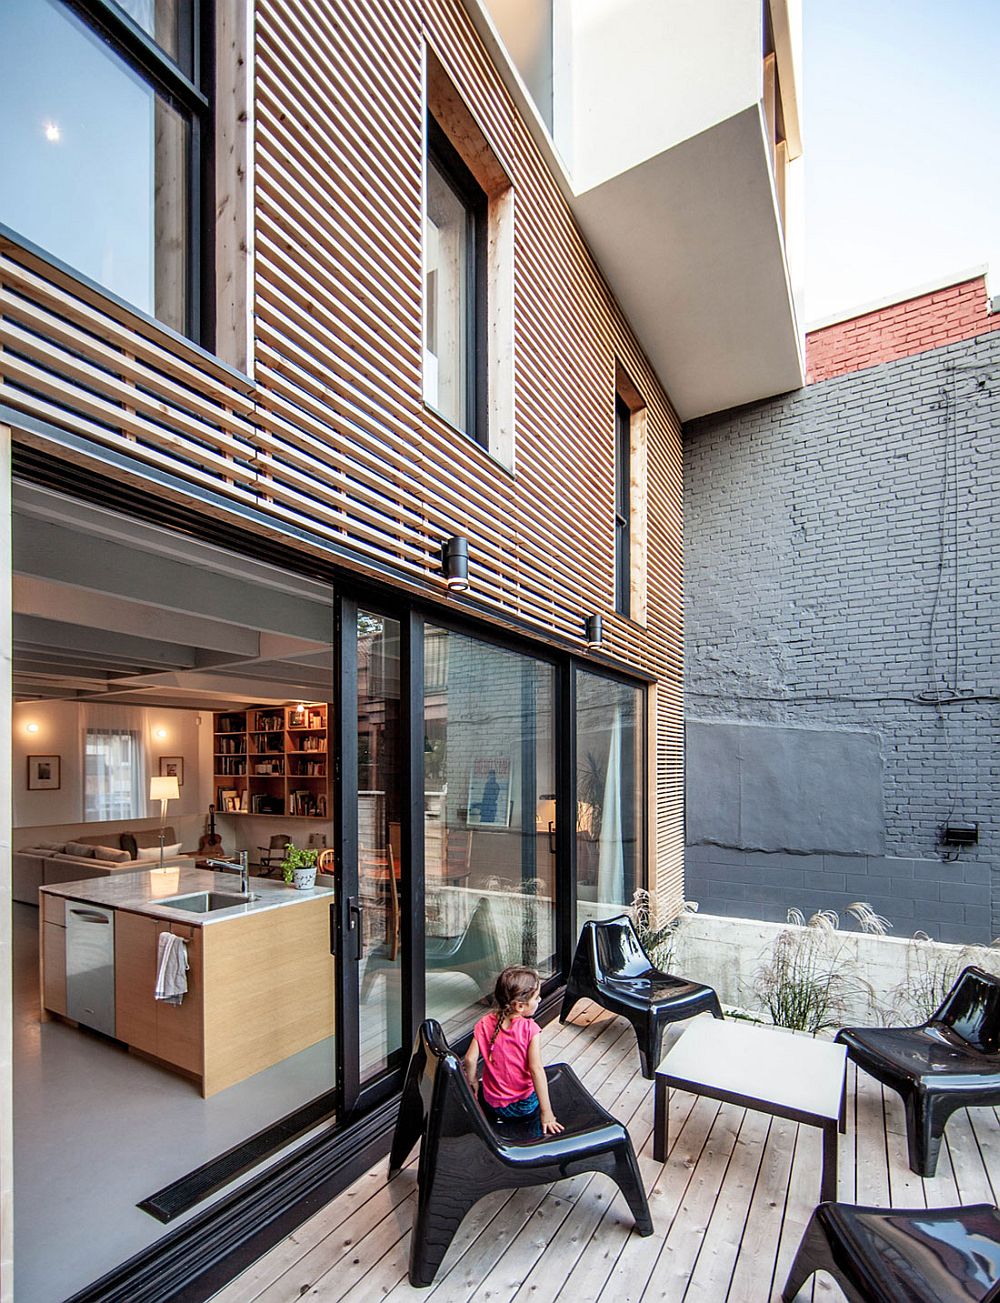 Small rear deck connected with the modern kitchen and living area of the Montreal home